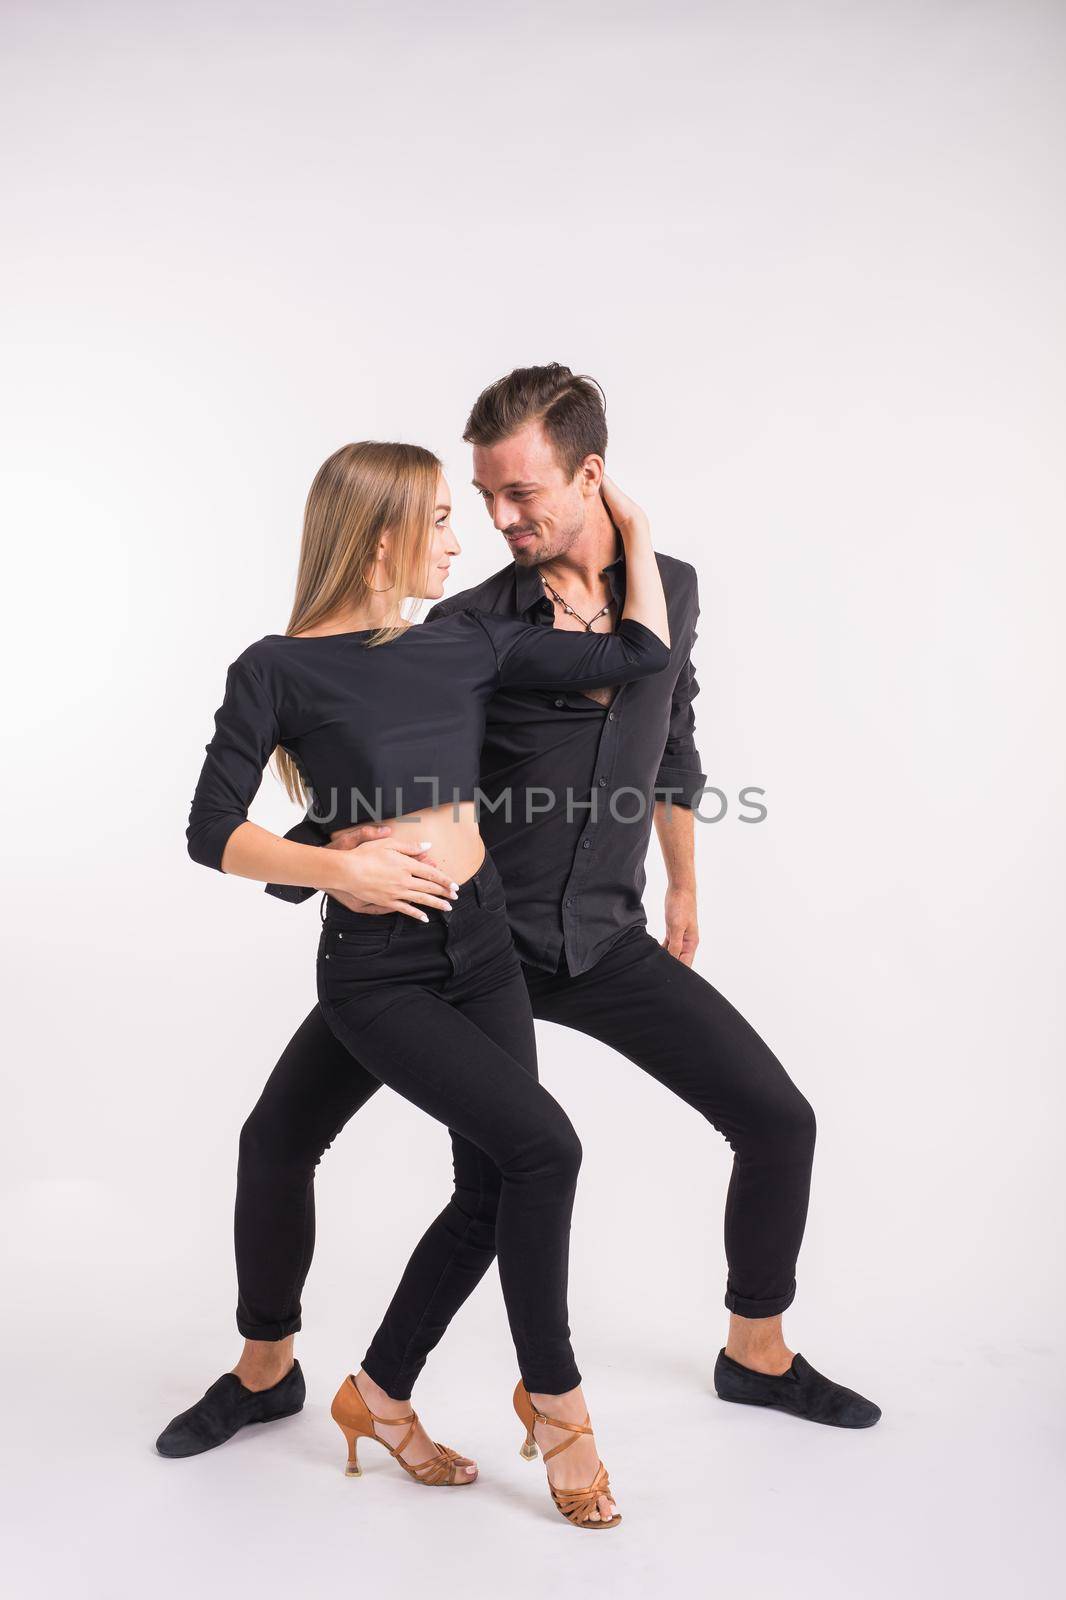 Salsa, kizomba and bachata dancers on white background. Social dance concept. by Satura86